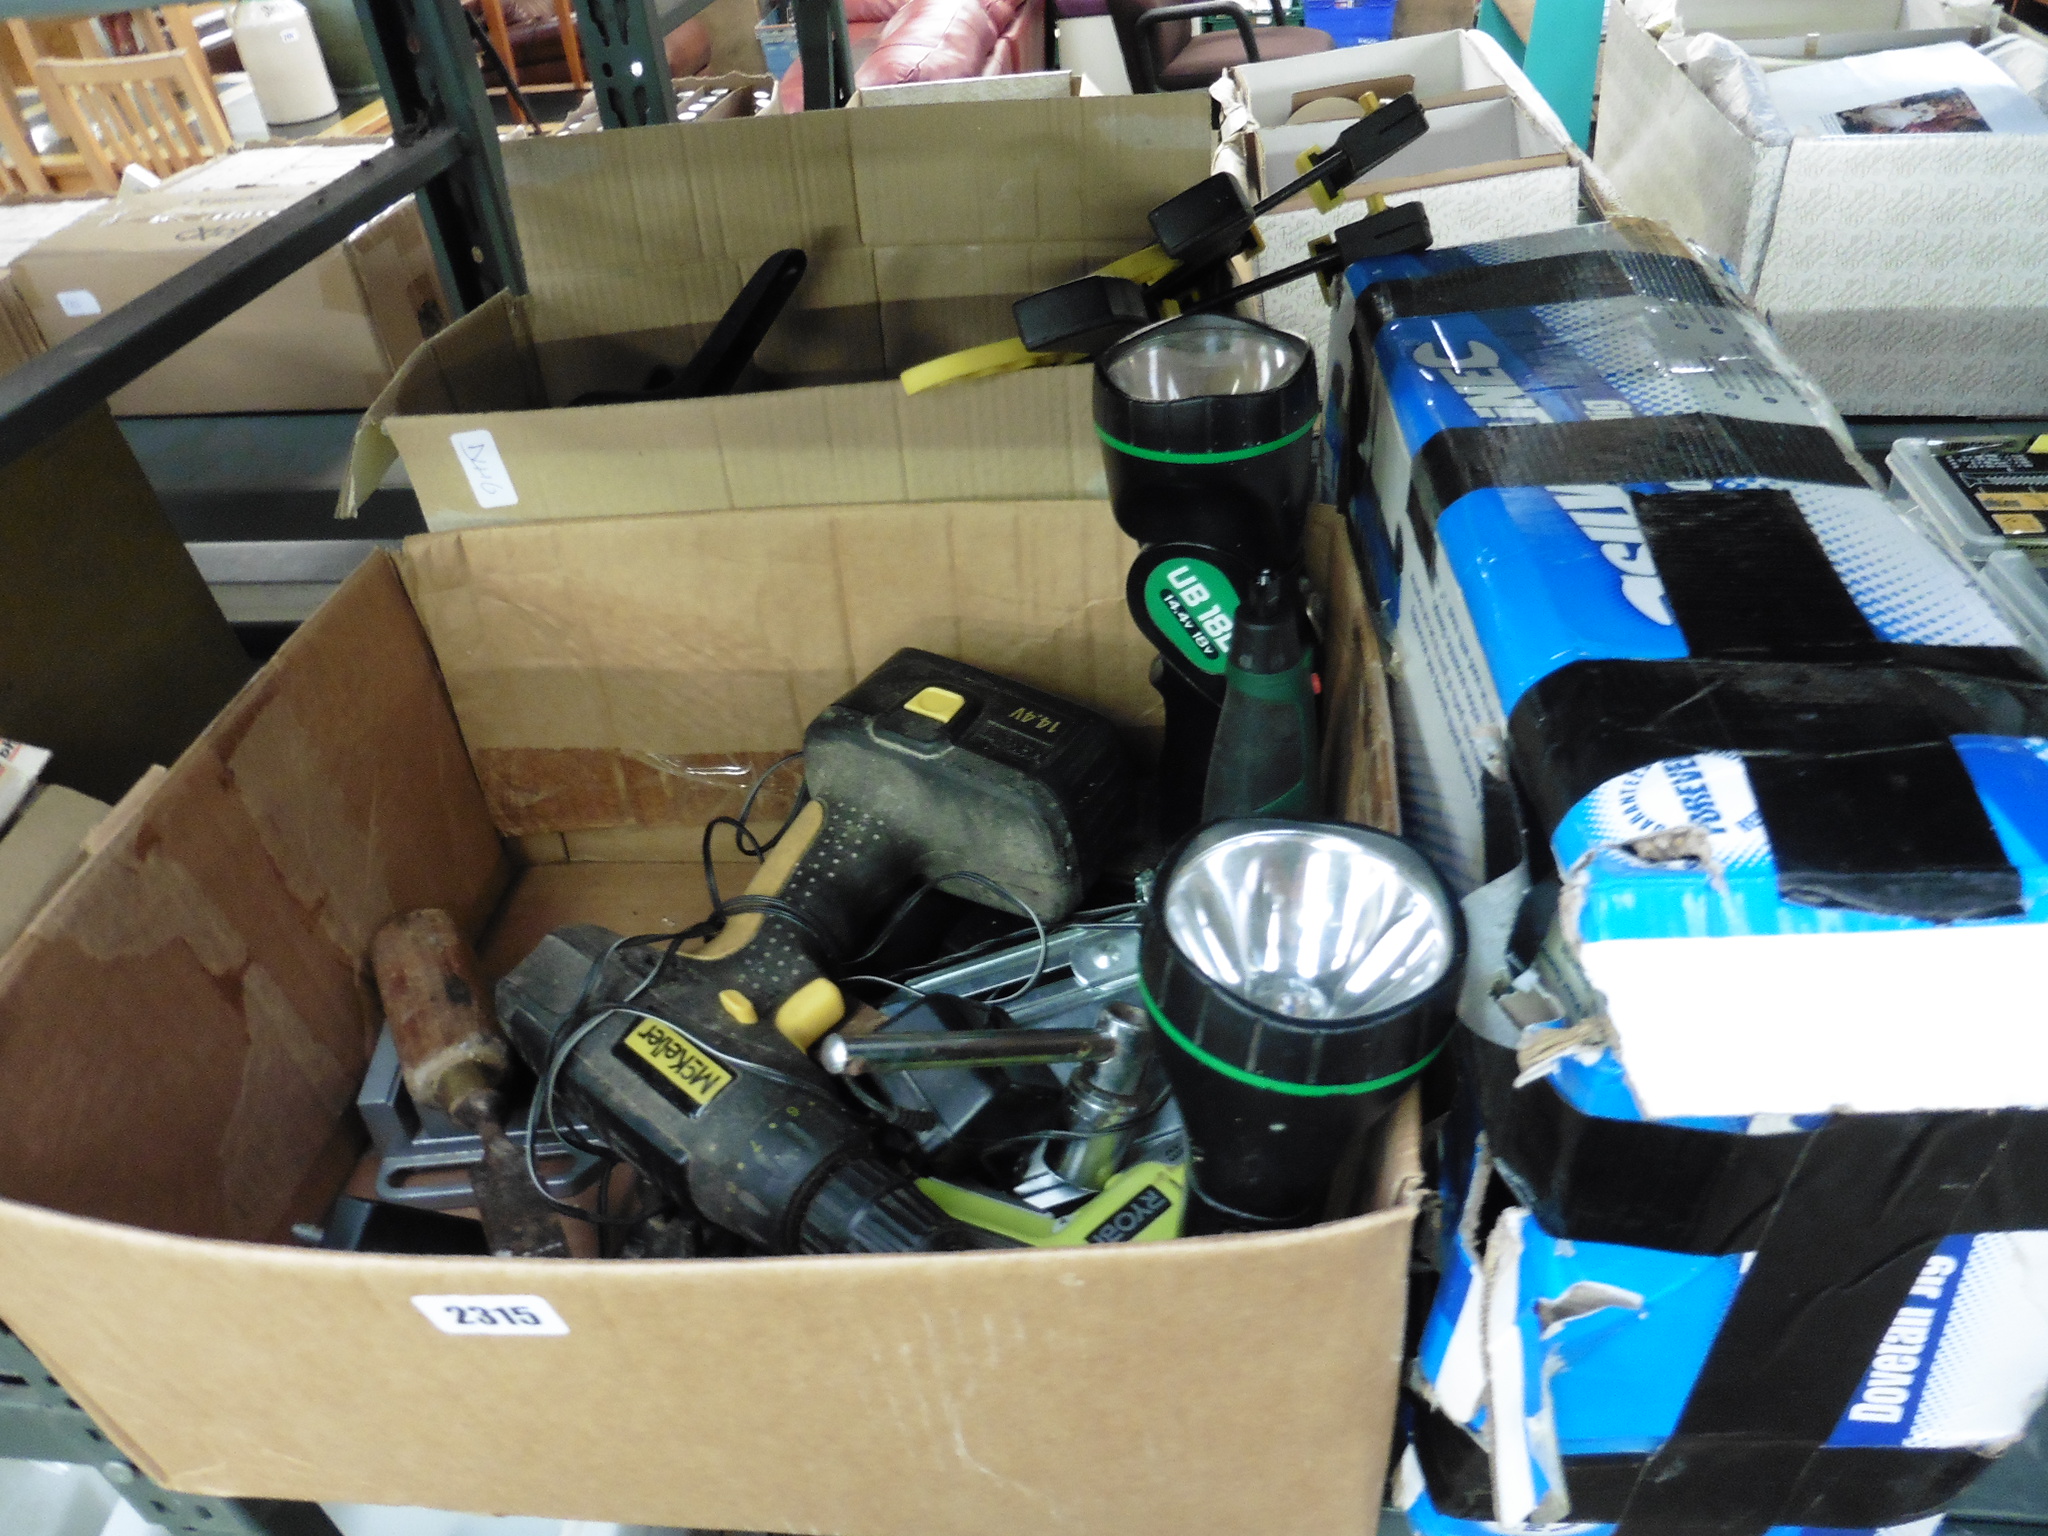 3 boxes of battery drills, torches, hand tools and dove tail jointing machine